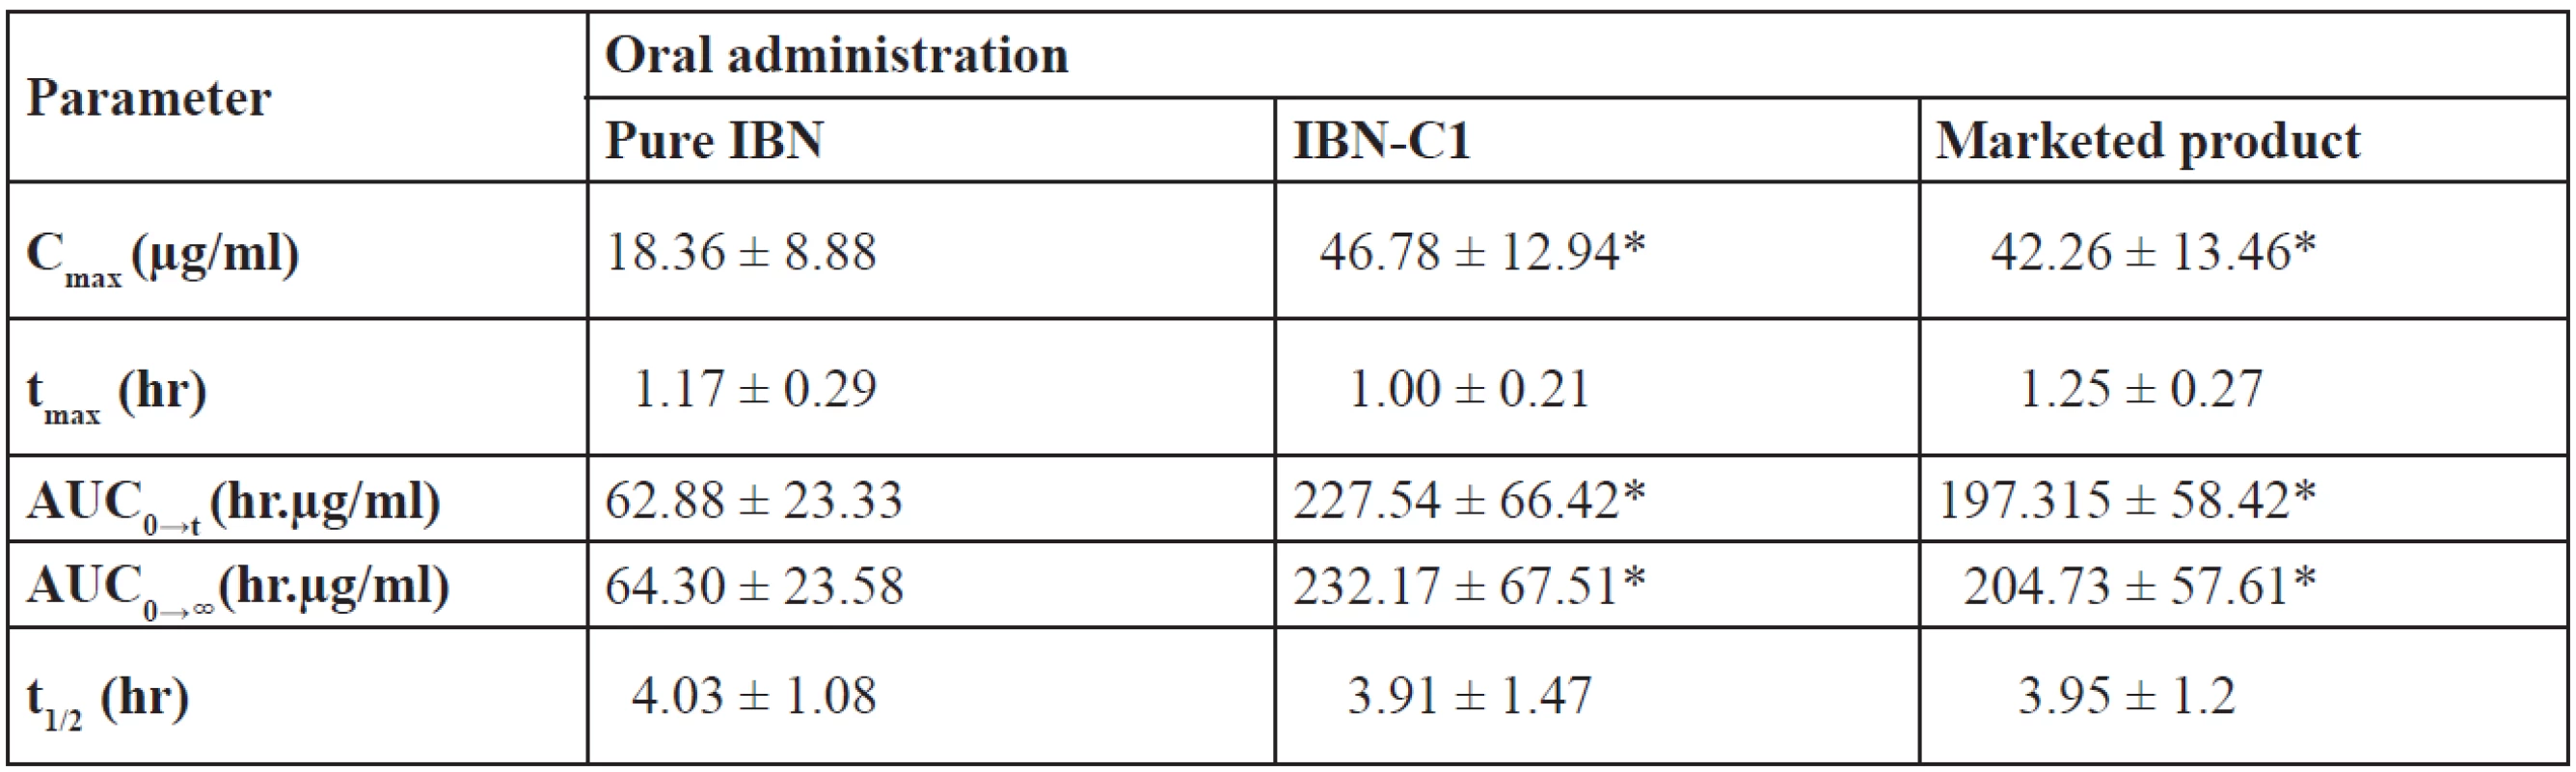 Pharmacokinetic parameters of IBN in rats after single oral dose of 20 mg/kg